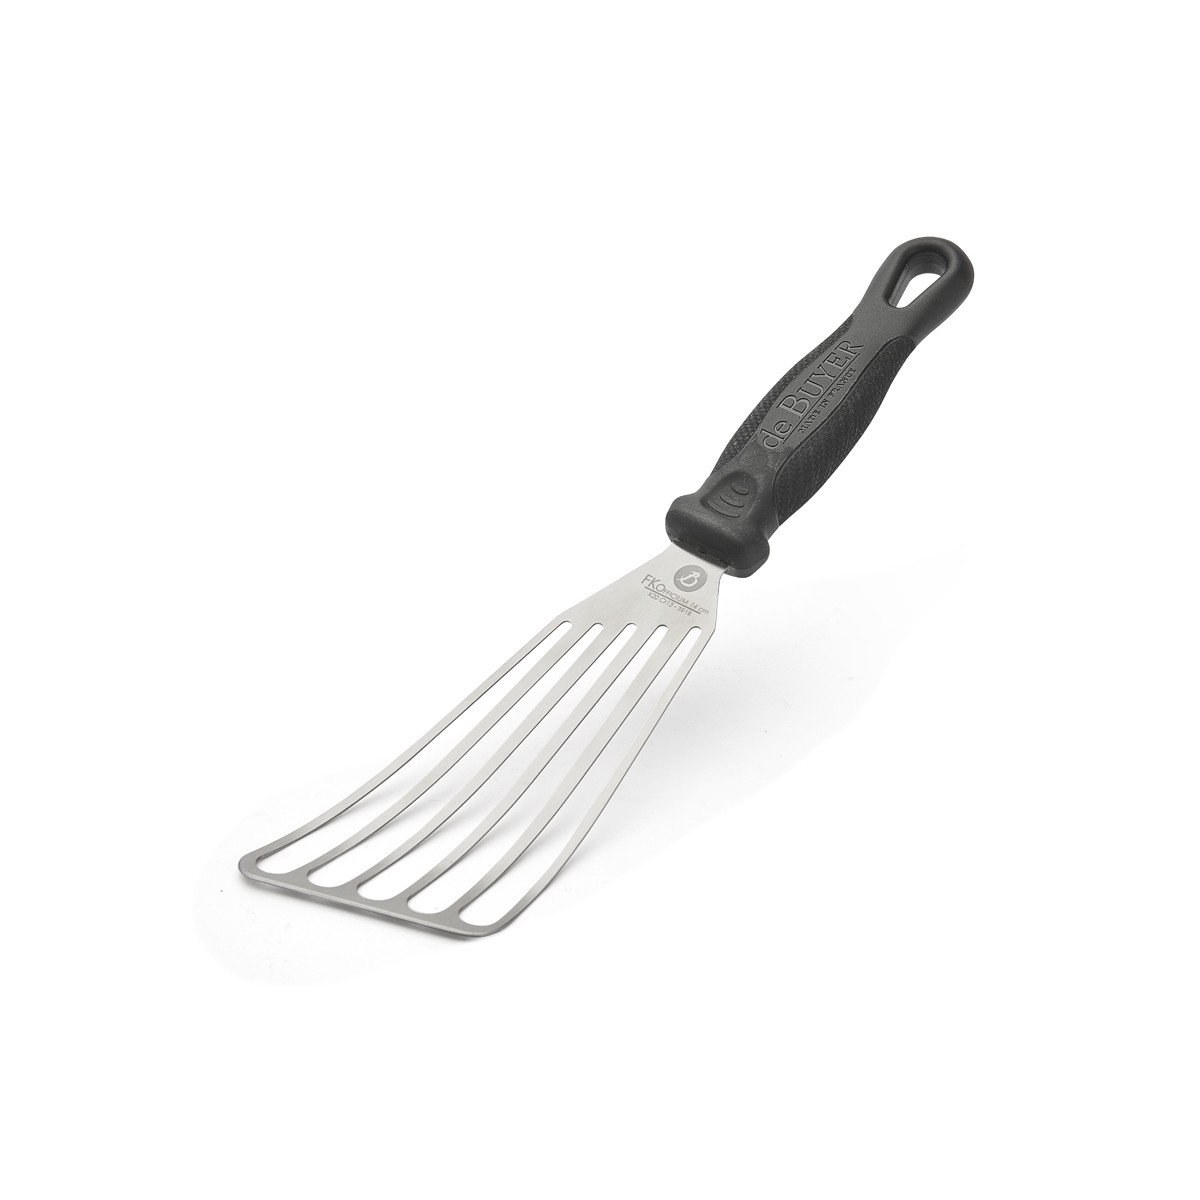 Stainless Steel Spatula Flexible Turner Ideal For Flipping - Temu